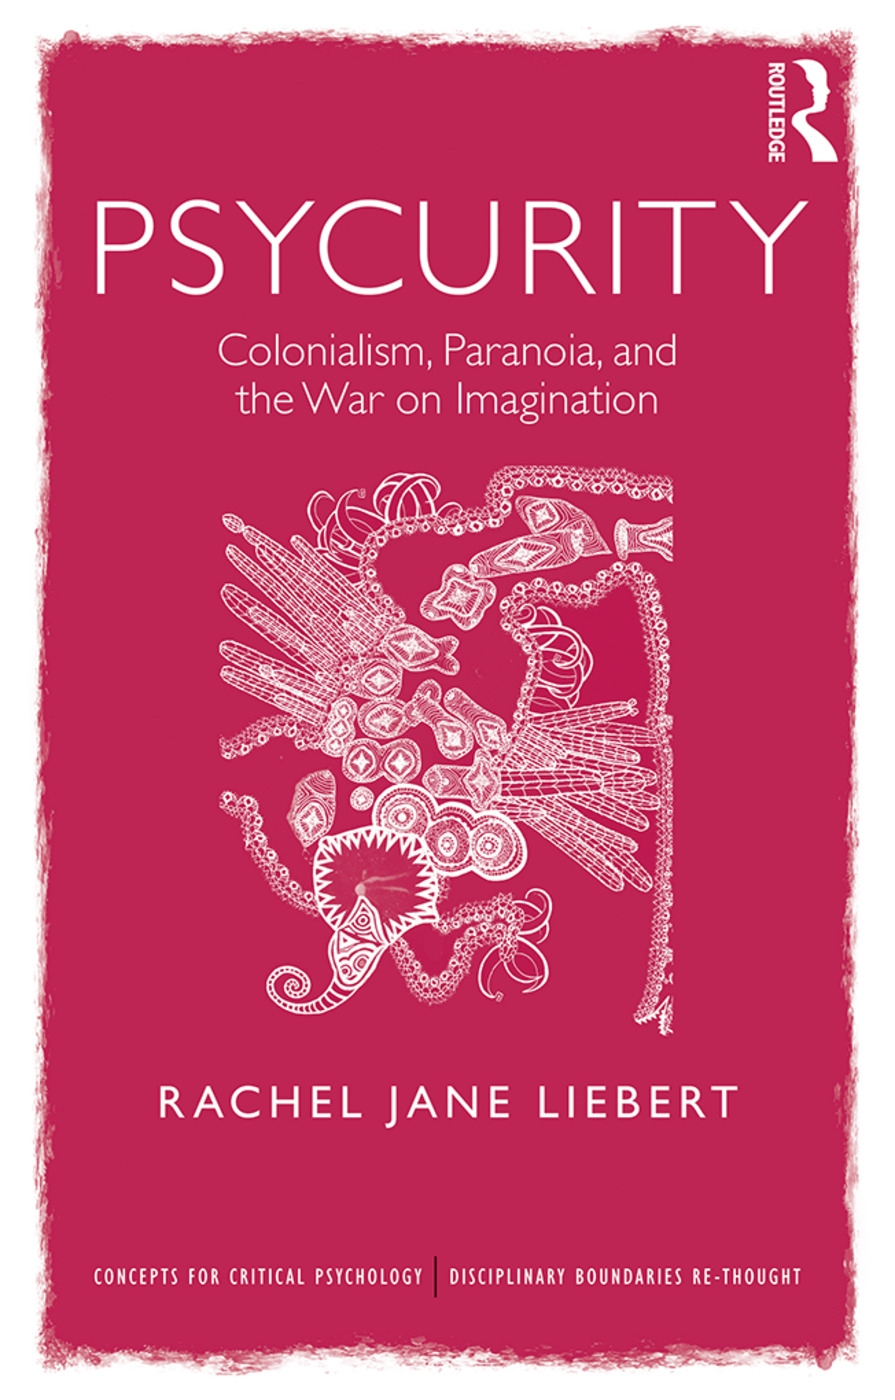 Psycurity: Colonialism, Paranoia, and the War on Imagination